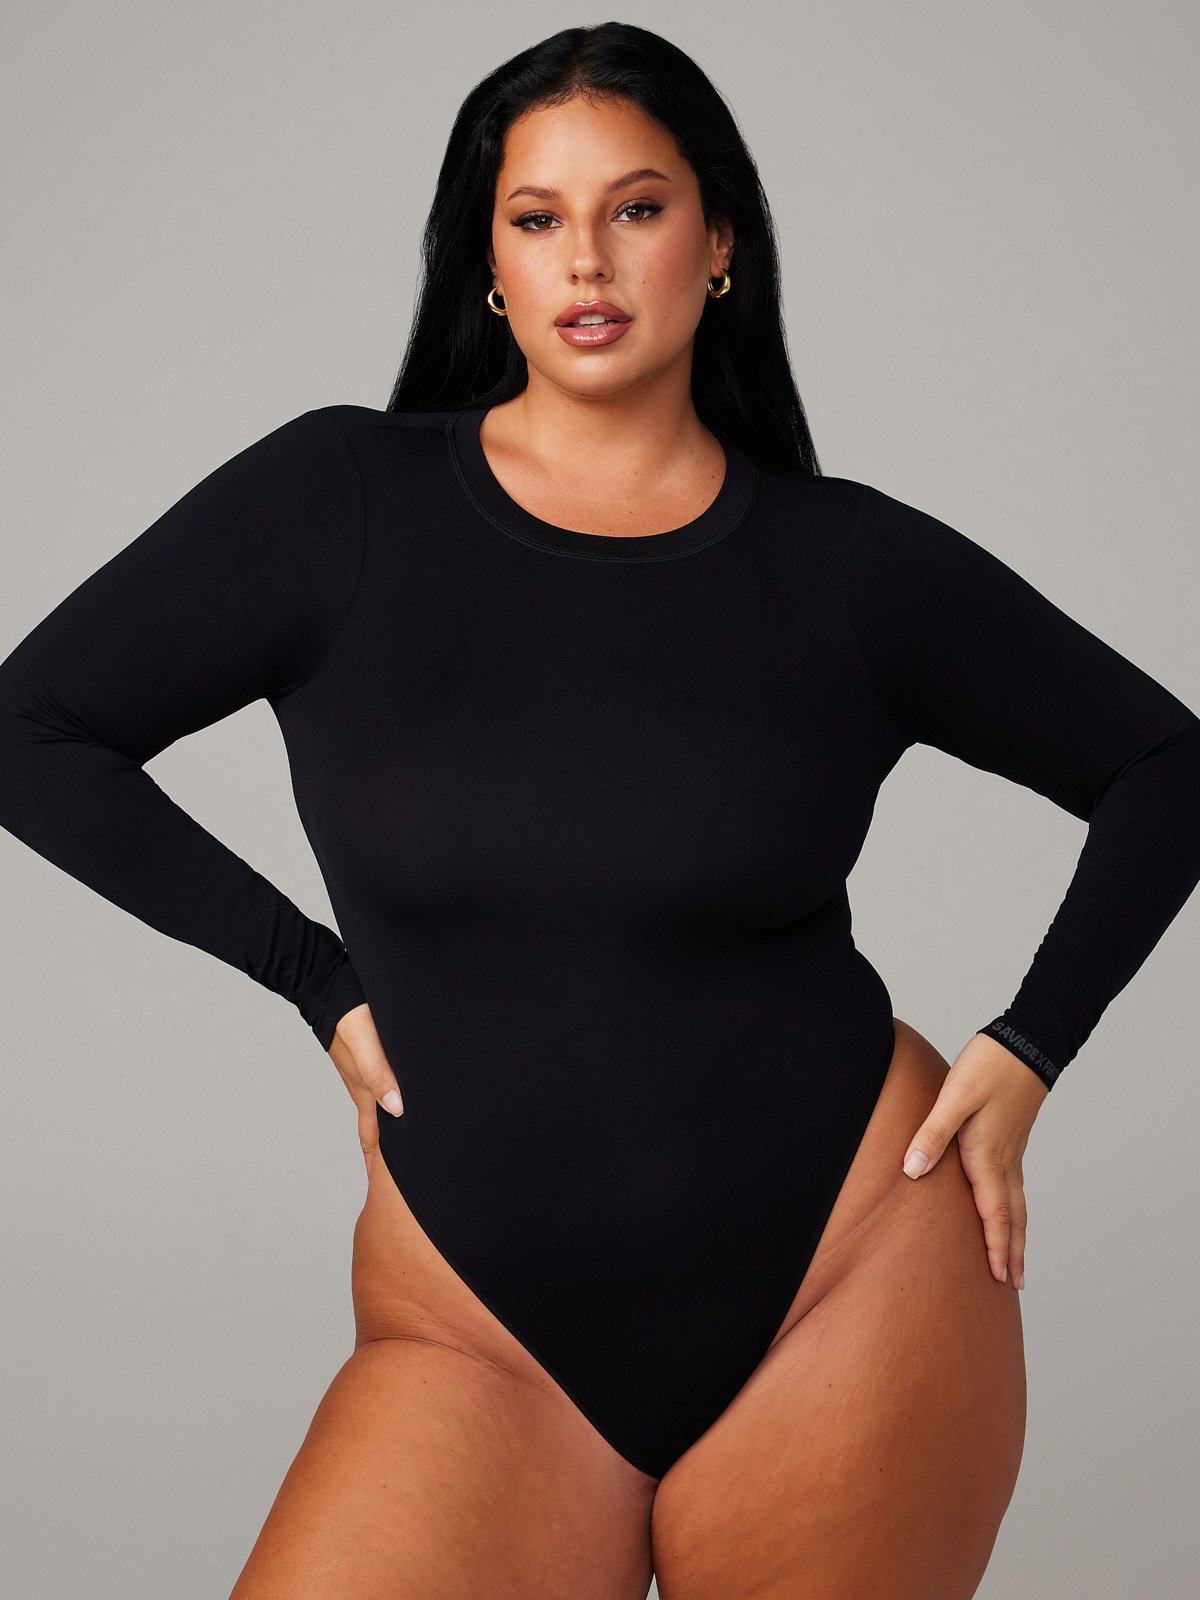 Long Sleeve Opaque Teddy! Bodysuit Black or White One Size Adult Woman